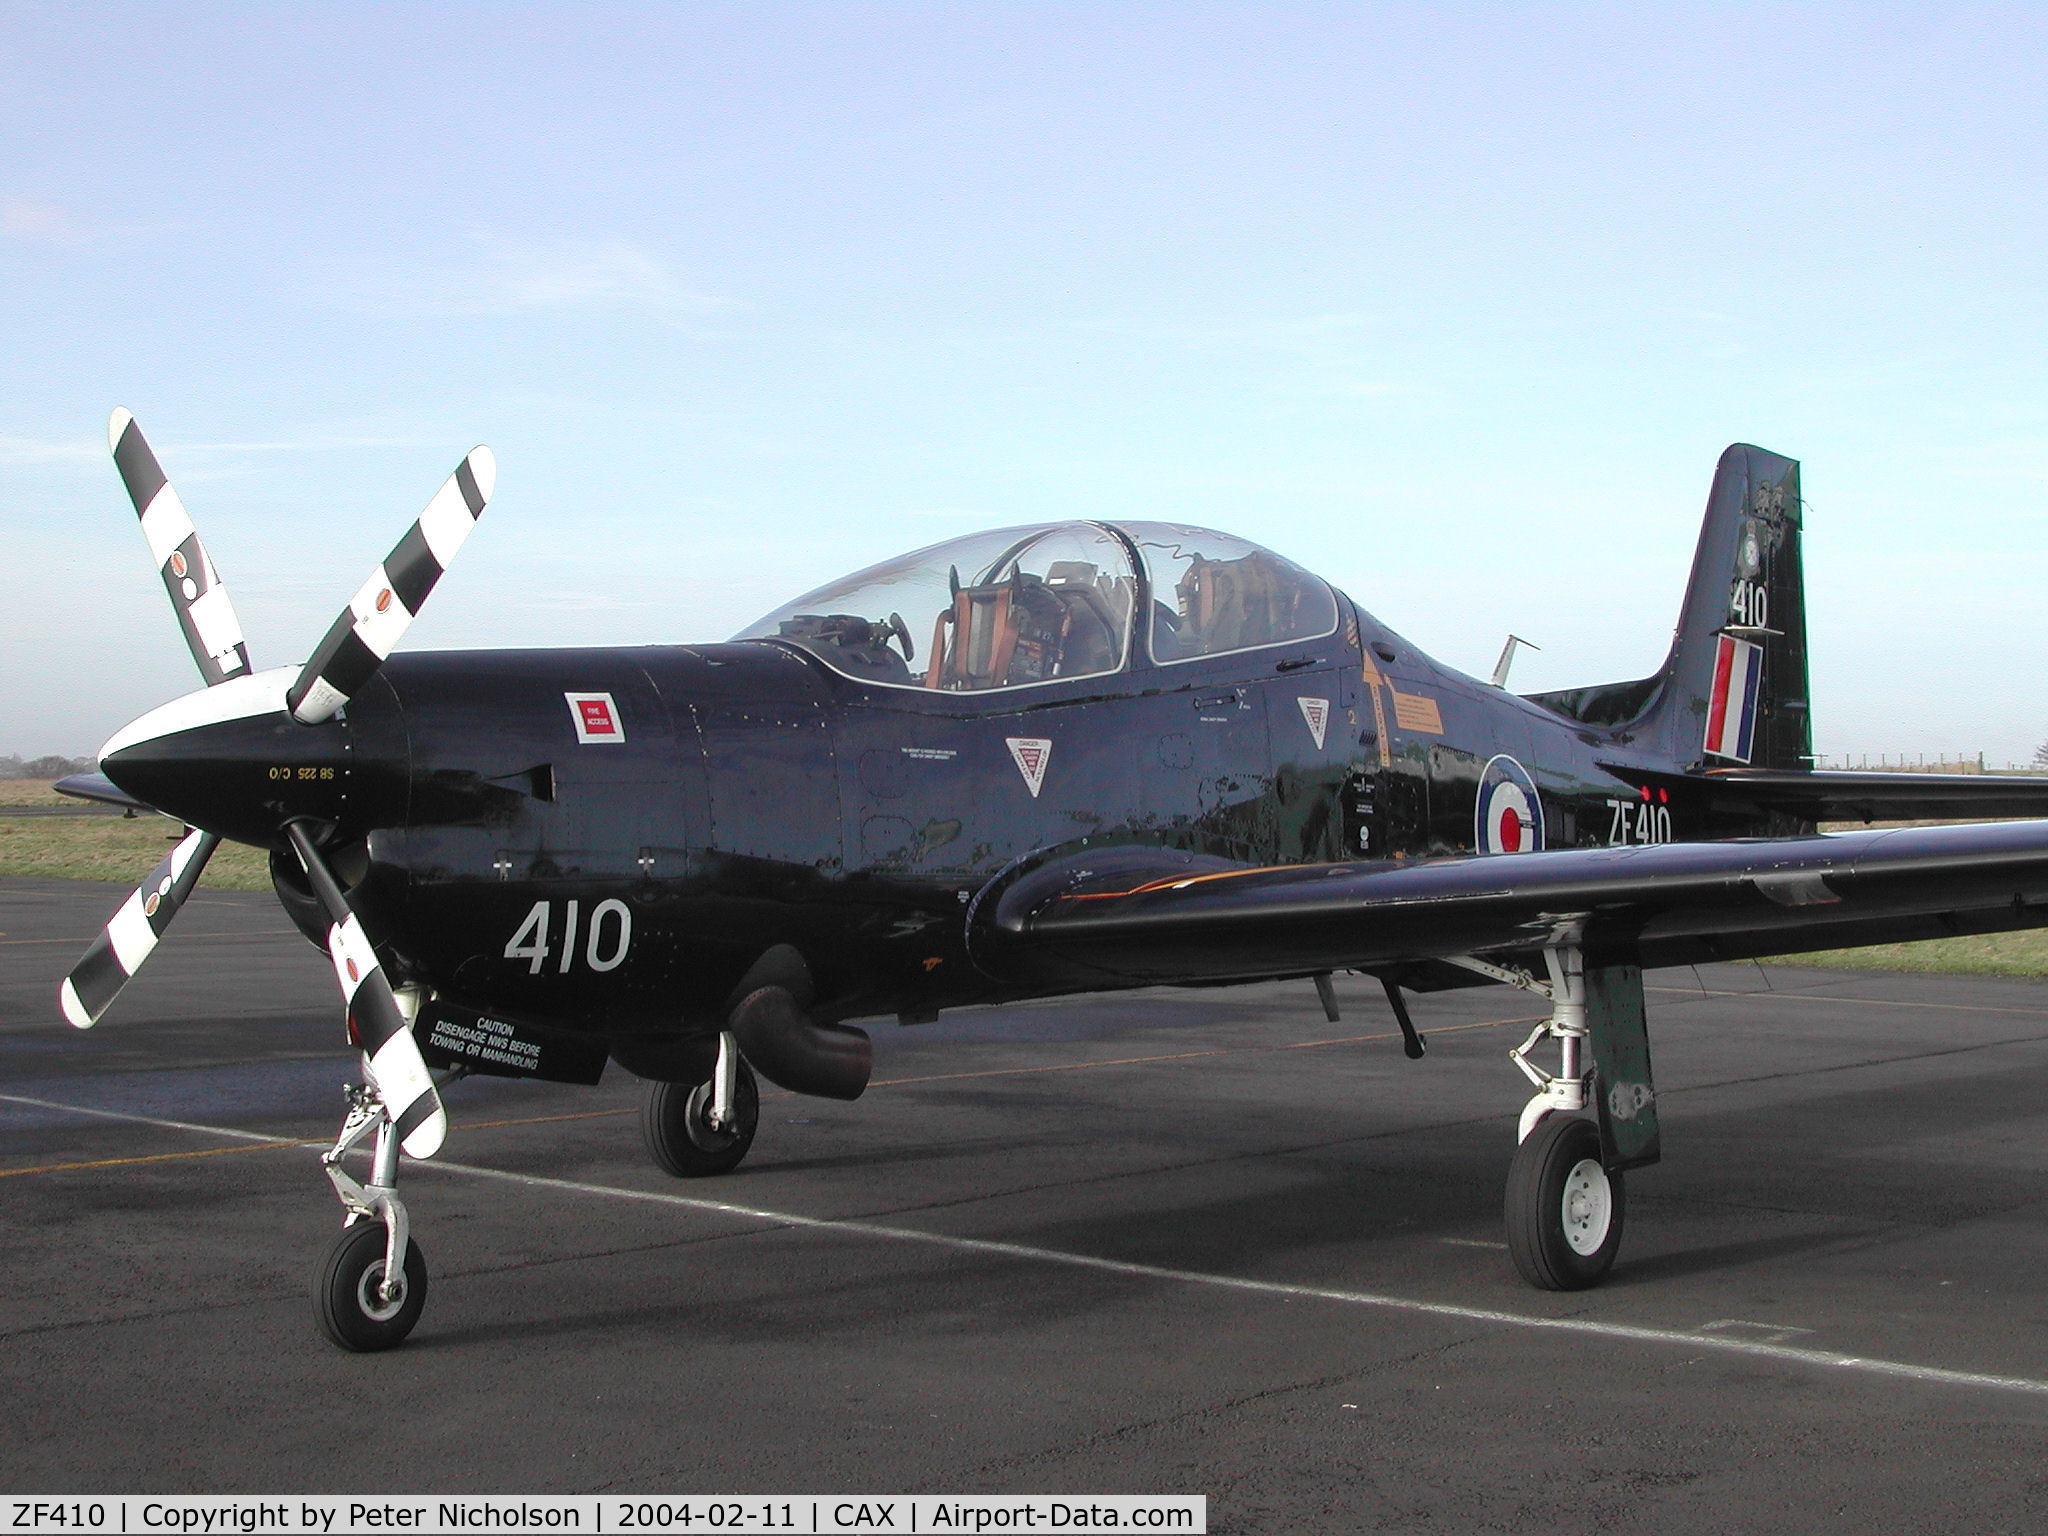 ZF410, 1992 Short S-312 Tucano T1 C/N S129/T100, Tucano T.1 of 1 Flying Training School at RAF Linton-on-Ouse visiting Carlisle in February 2004.